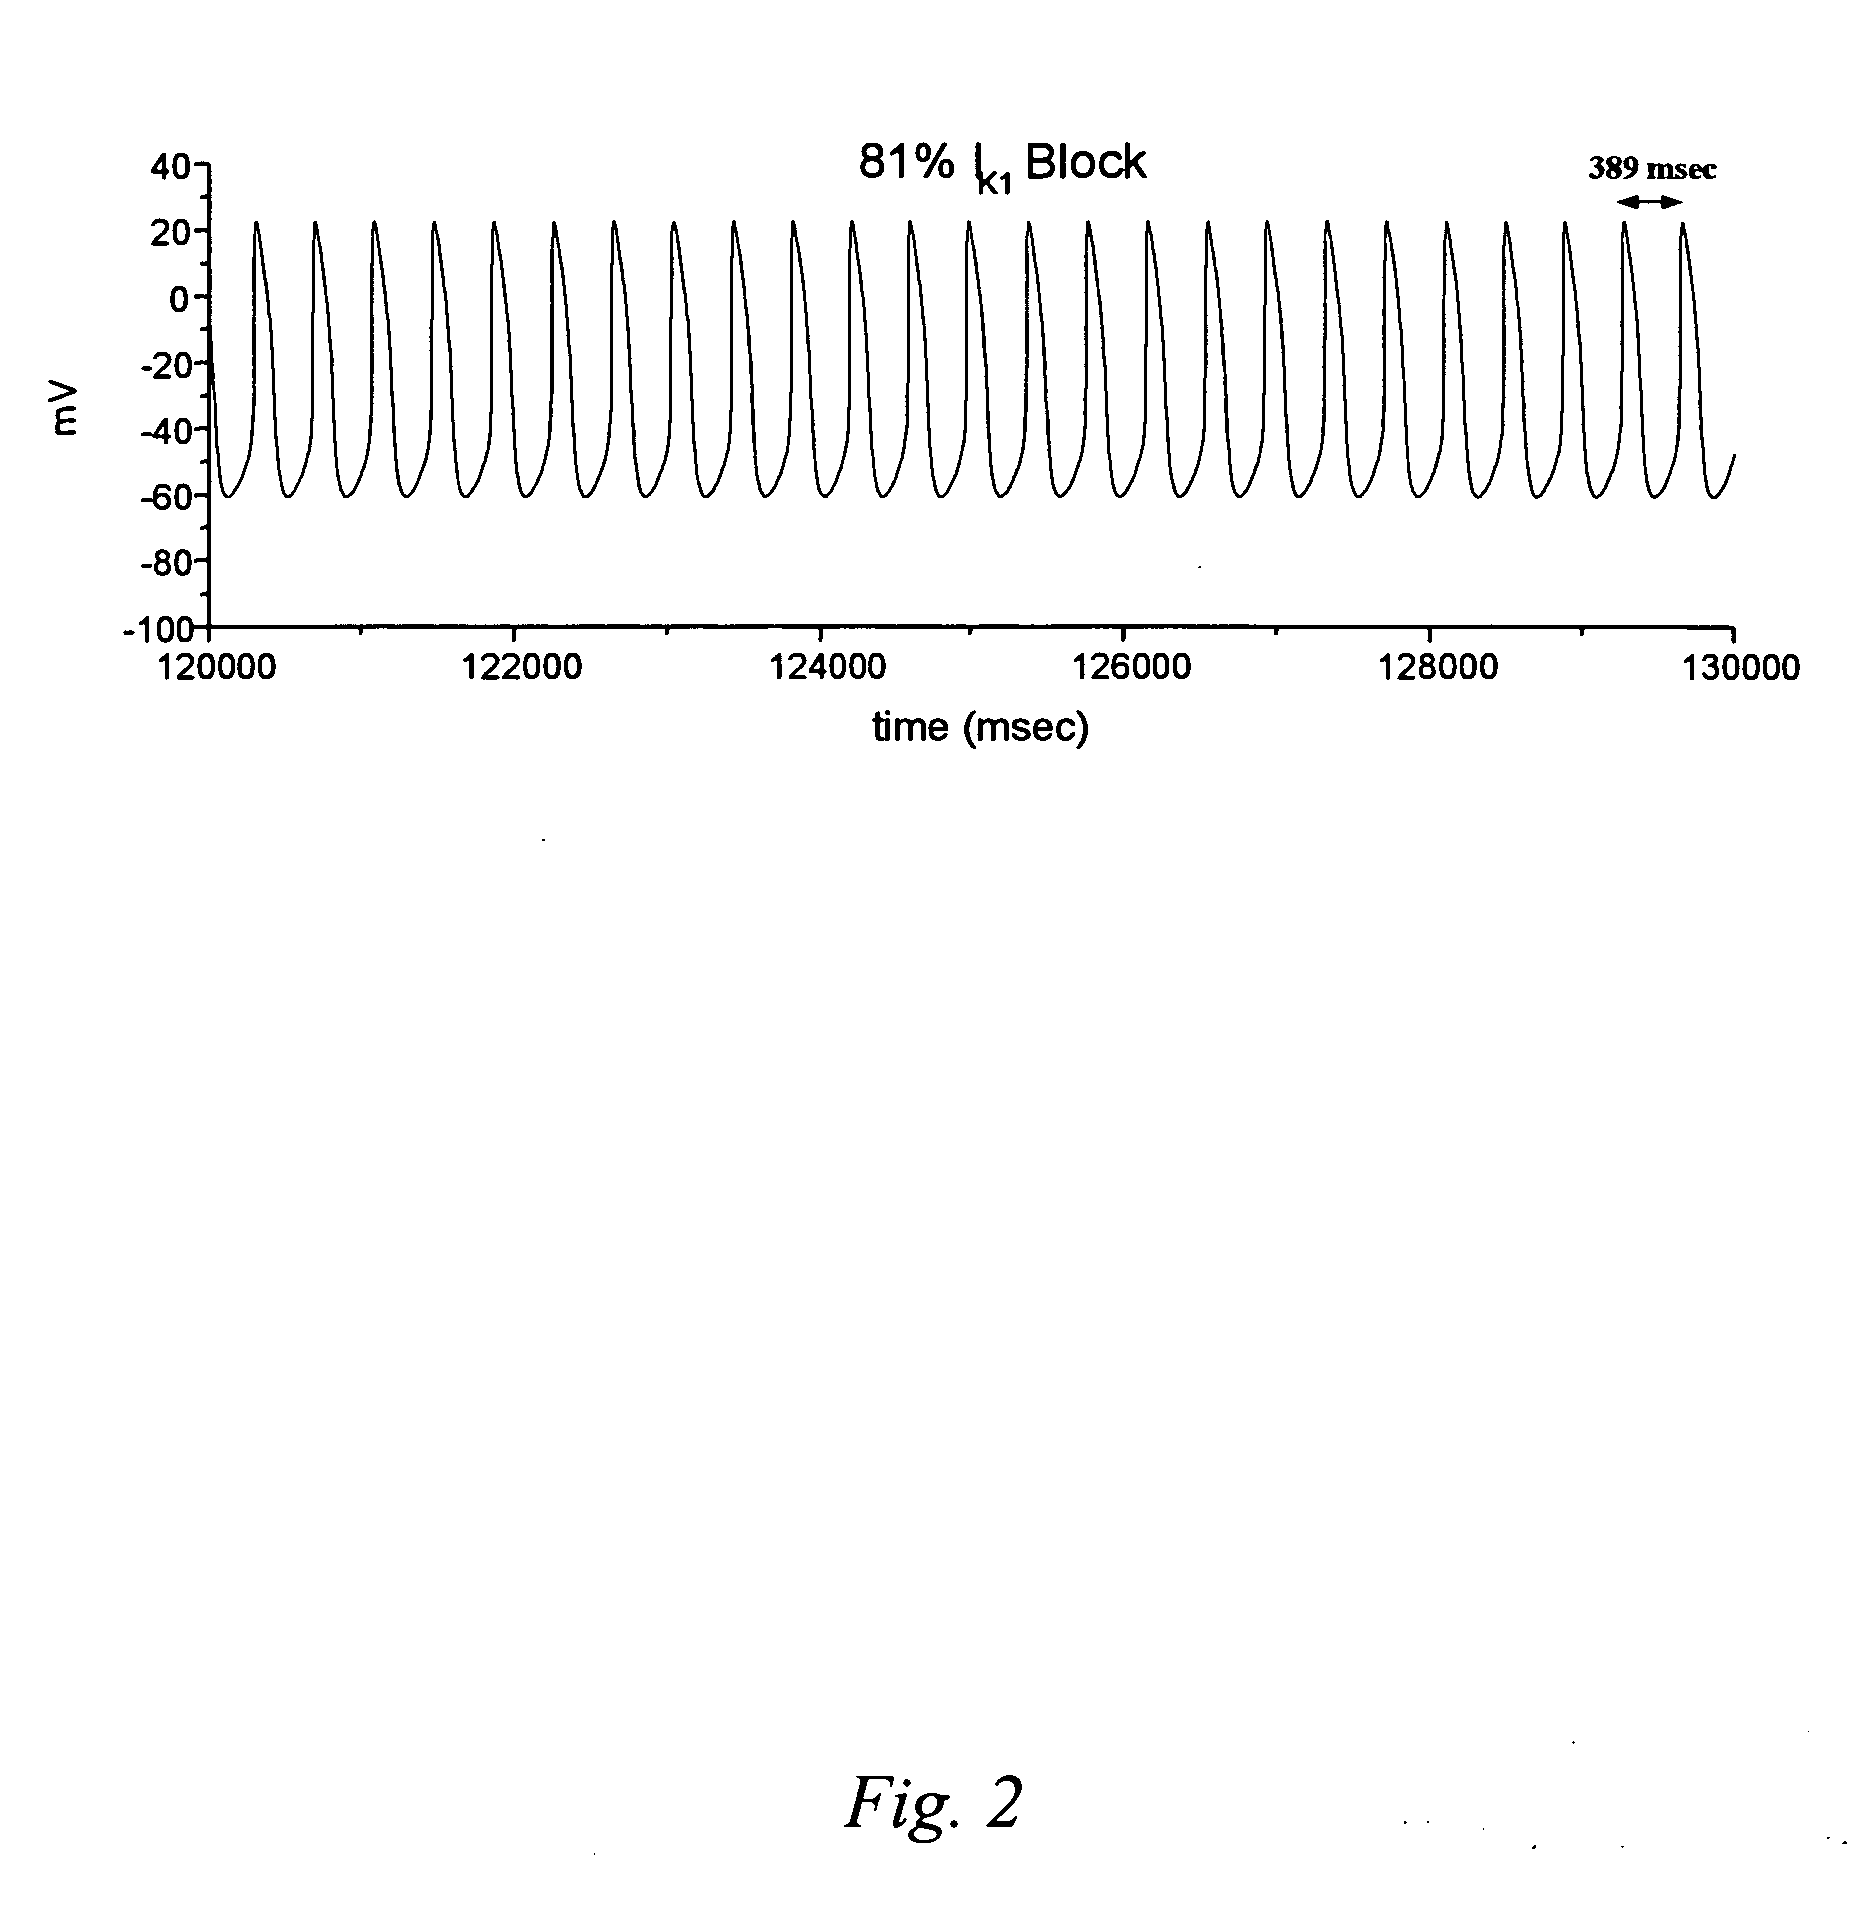 Methods of treating cardiac disorders by suppressing the expression of the potassium inwardly-rectifying channel